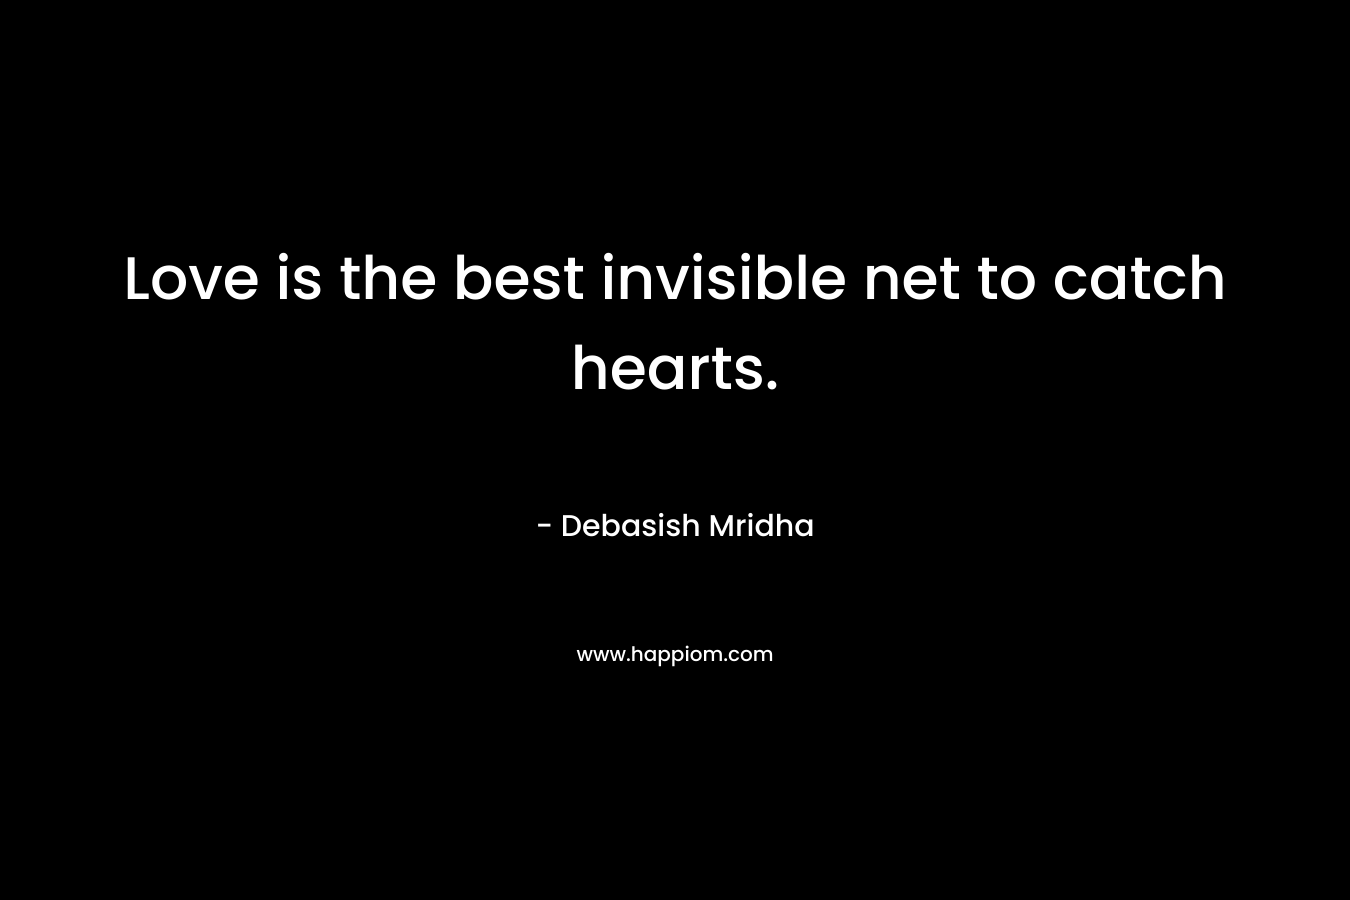 Love is the best invisible net to catch hearts.